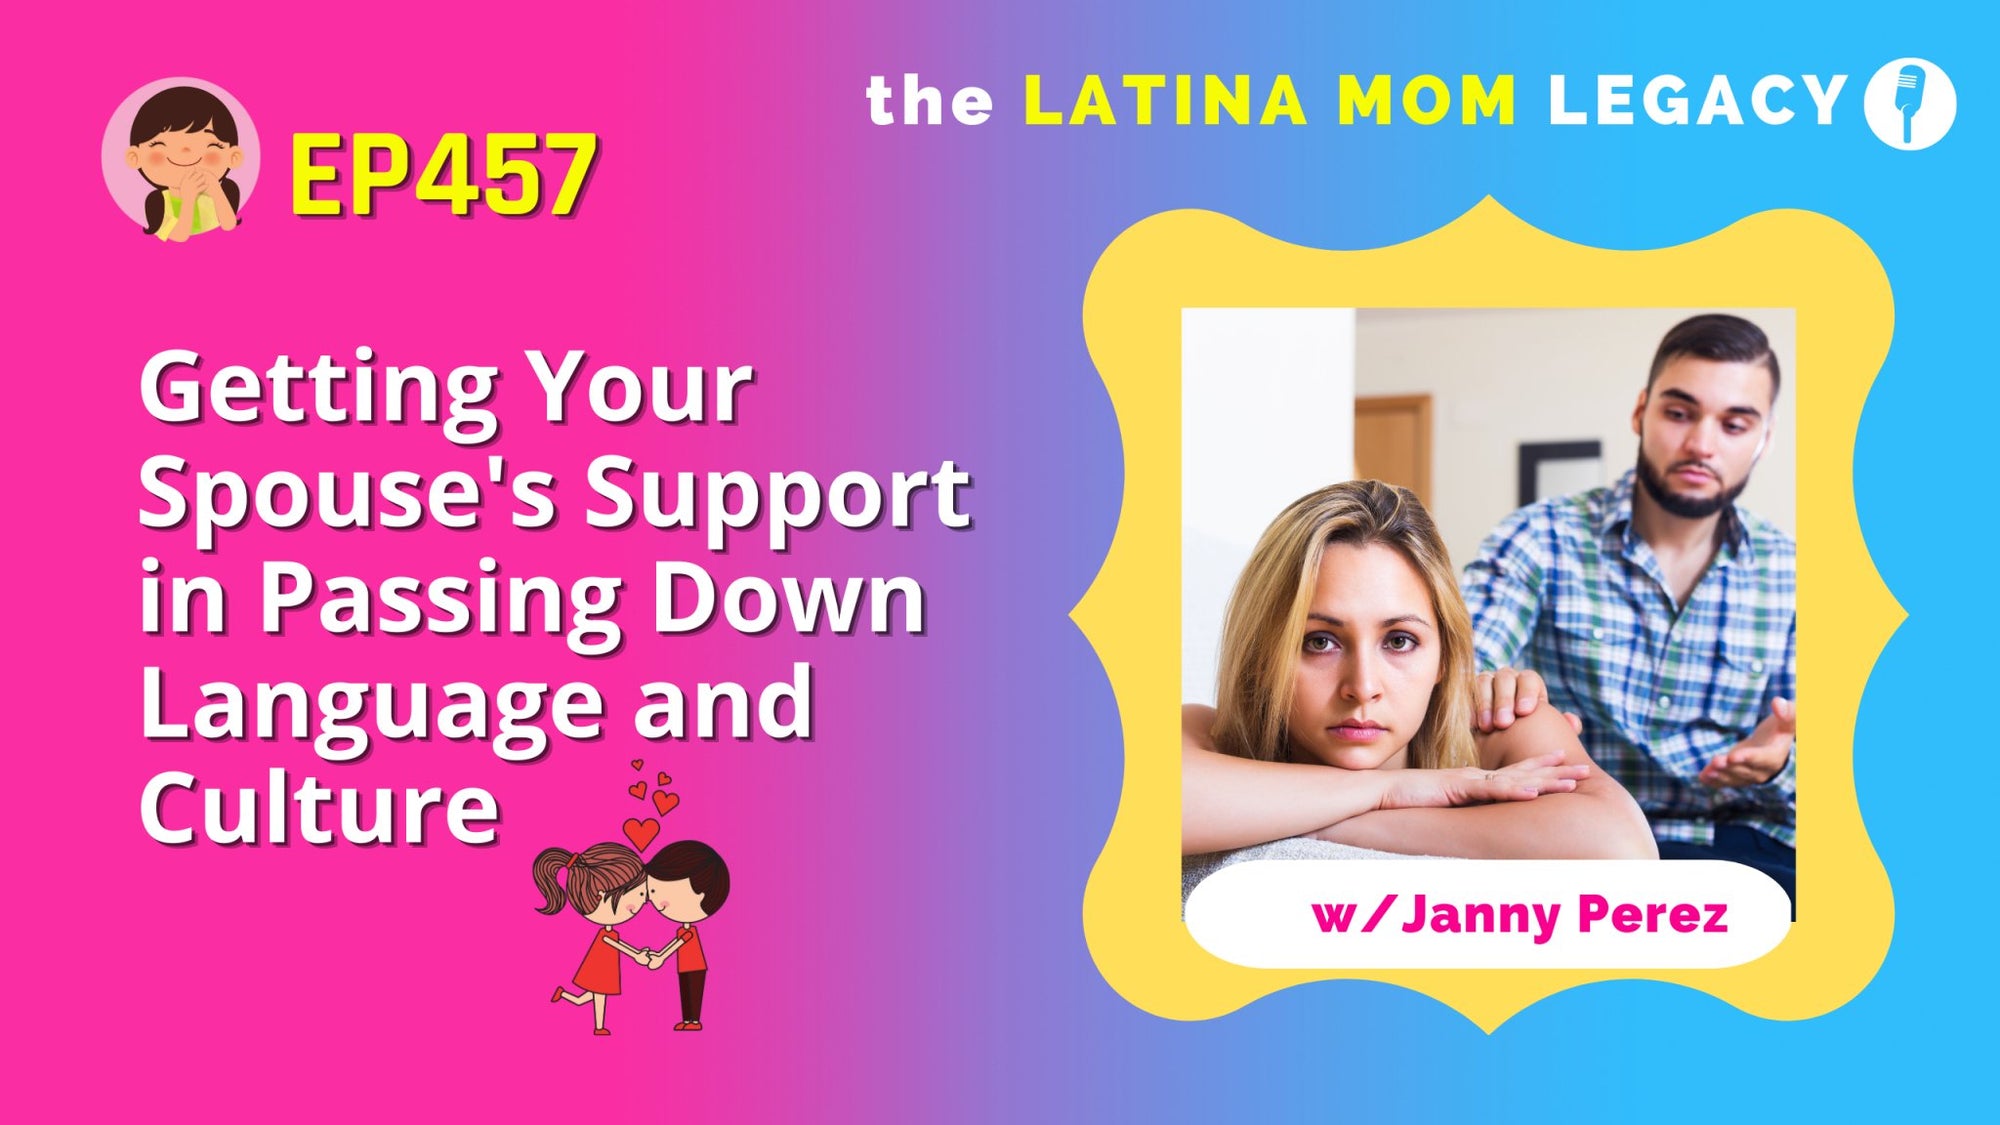 EP457 Getting Your Spouse's Support in Passing Down Language and Culture - Mi LegaSi